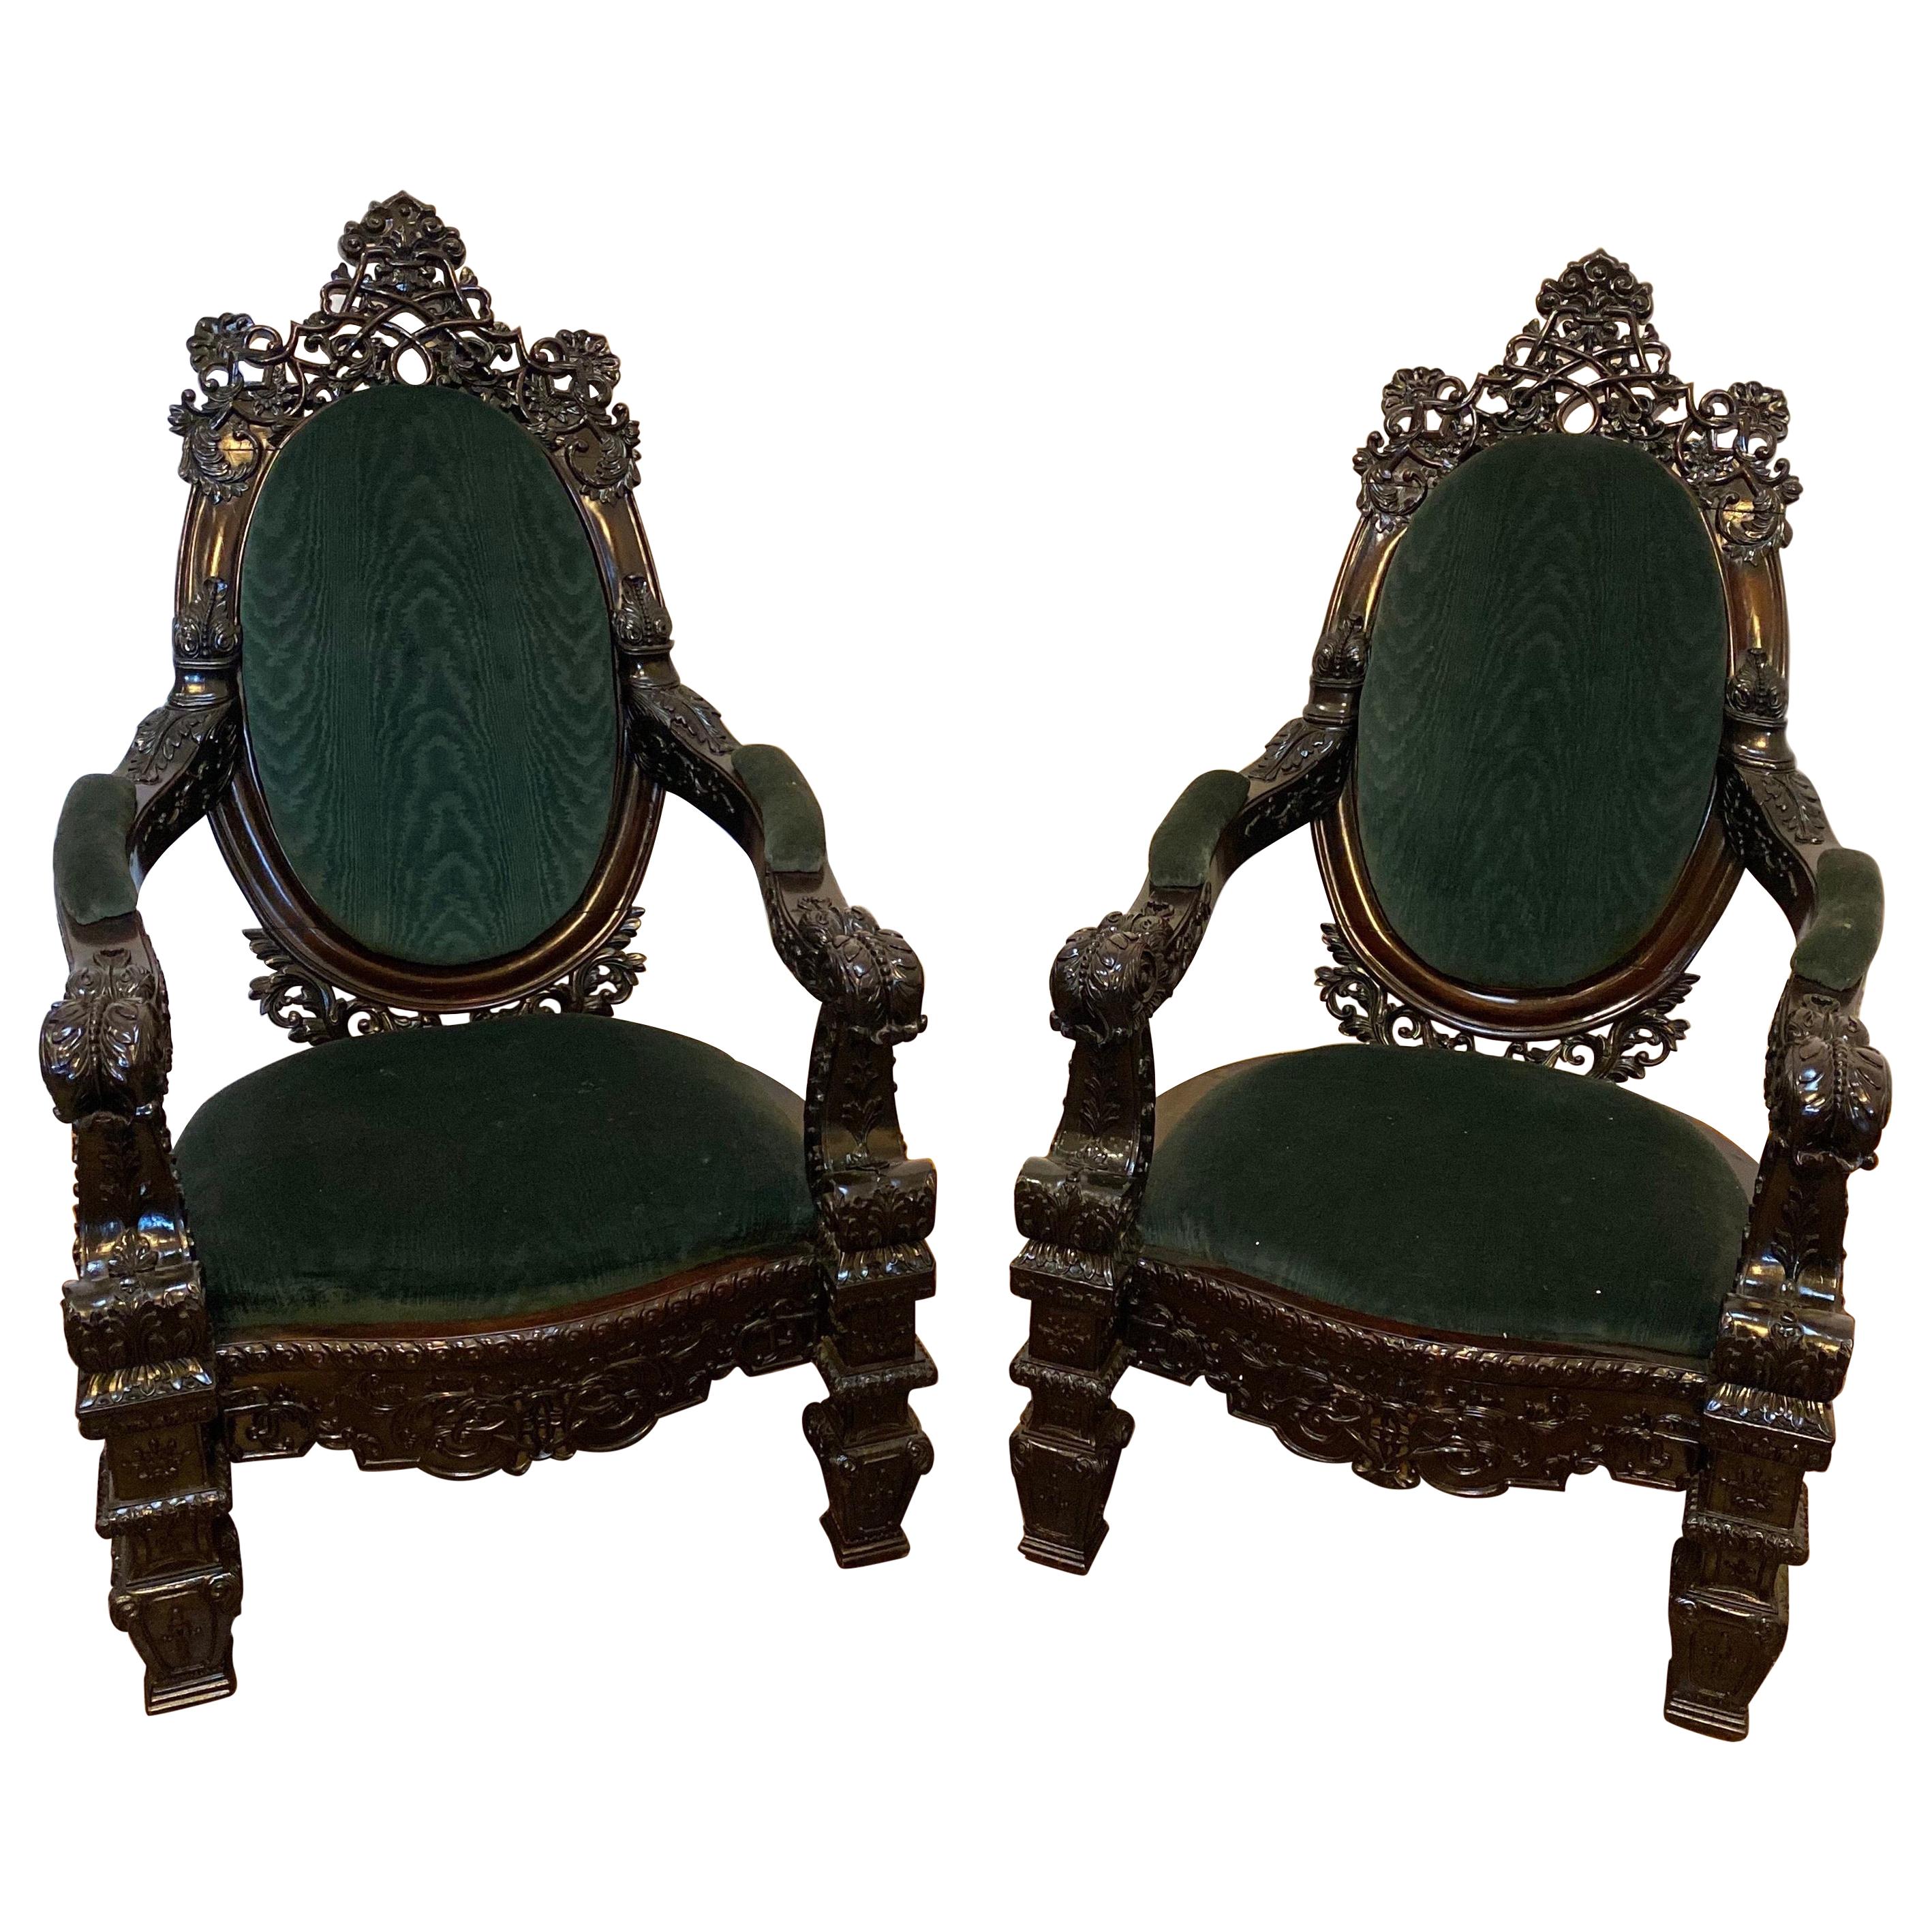 Incredibly Carved 19th Century Anglo-Indian Rosewood Palatial Chairs